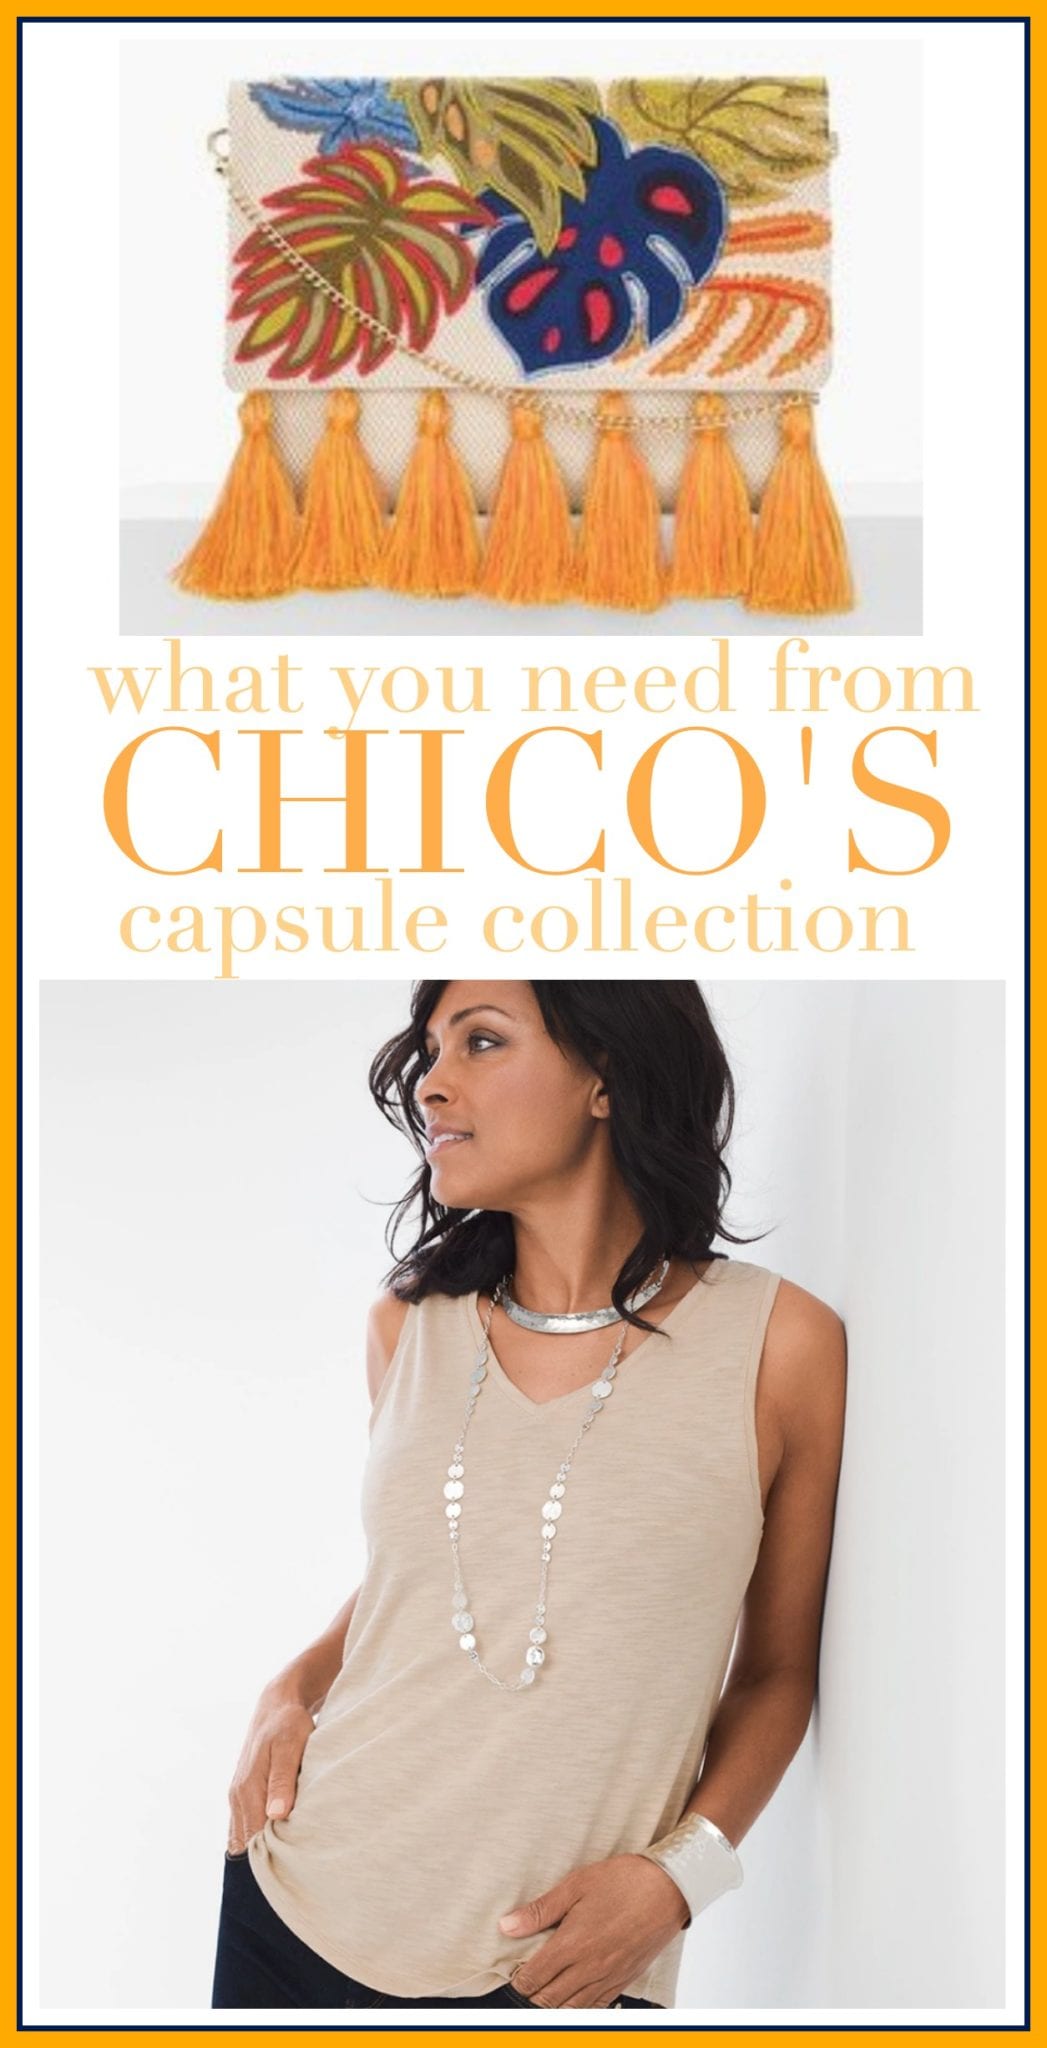 chico's capsule collection, chicos, chico's women wear